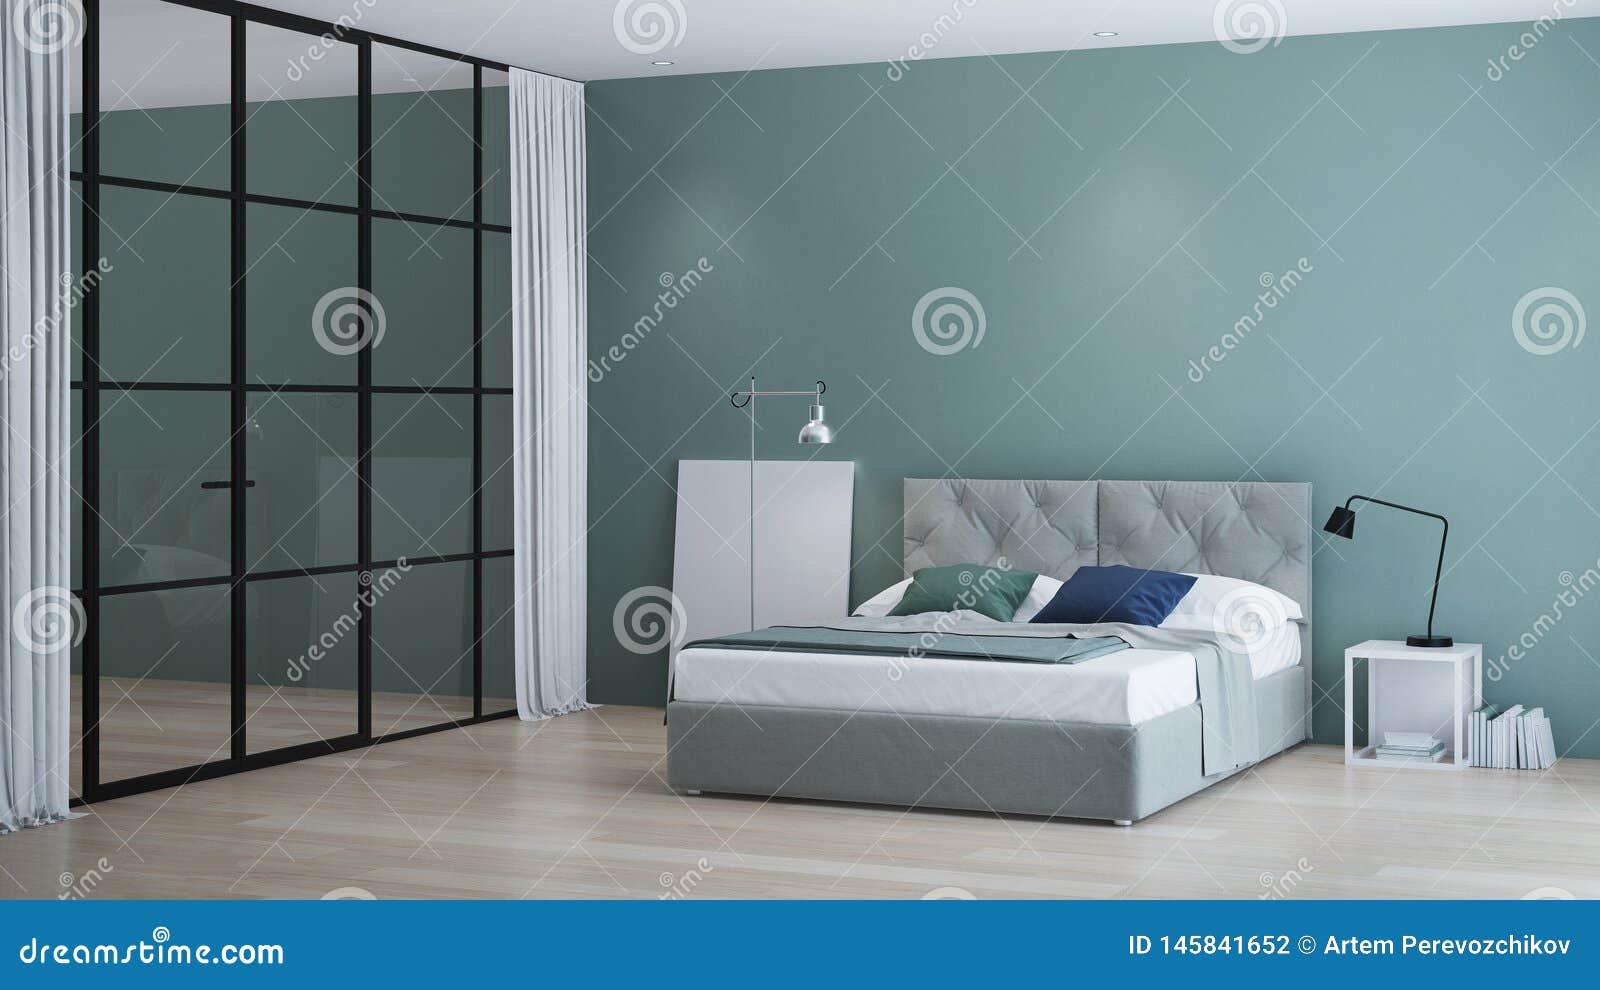 modern house interior. interior bedroom with glass partitions.